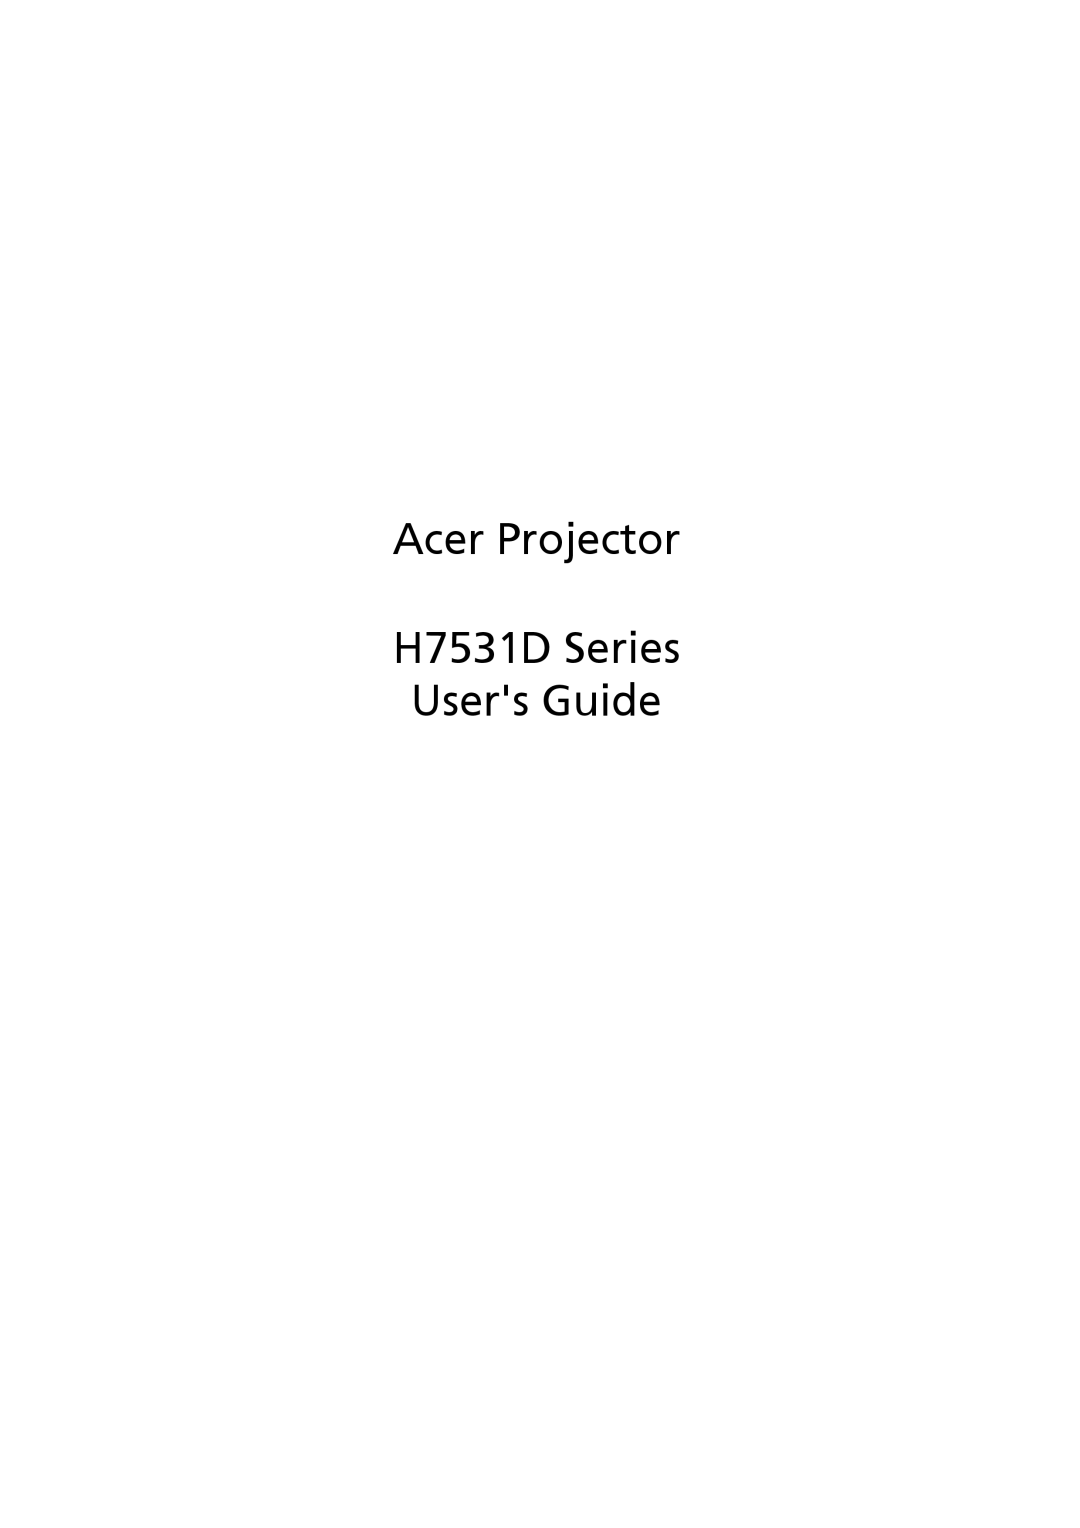 Acer manual Acer Projector H7531D Series Users Guide 